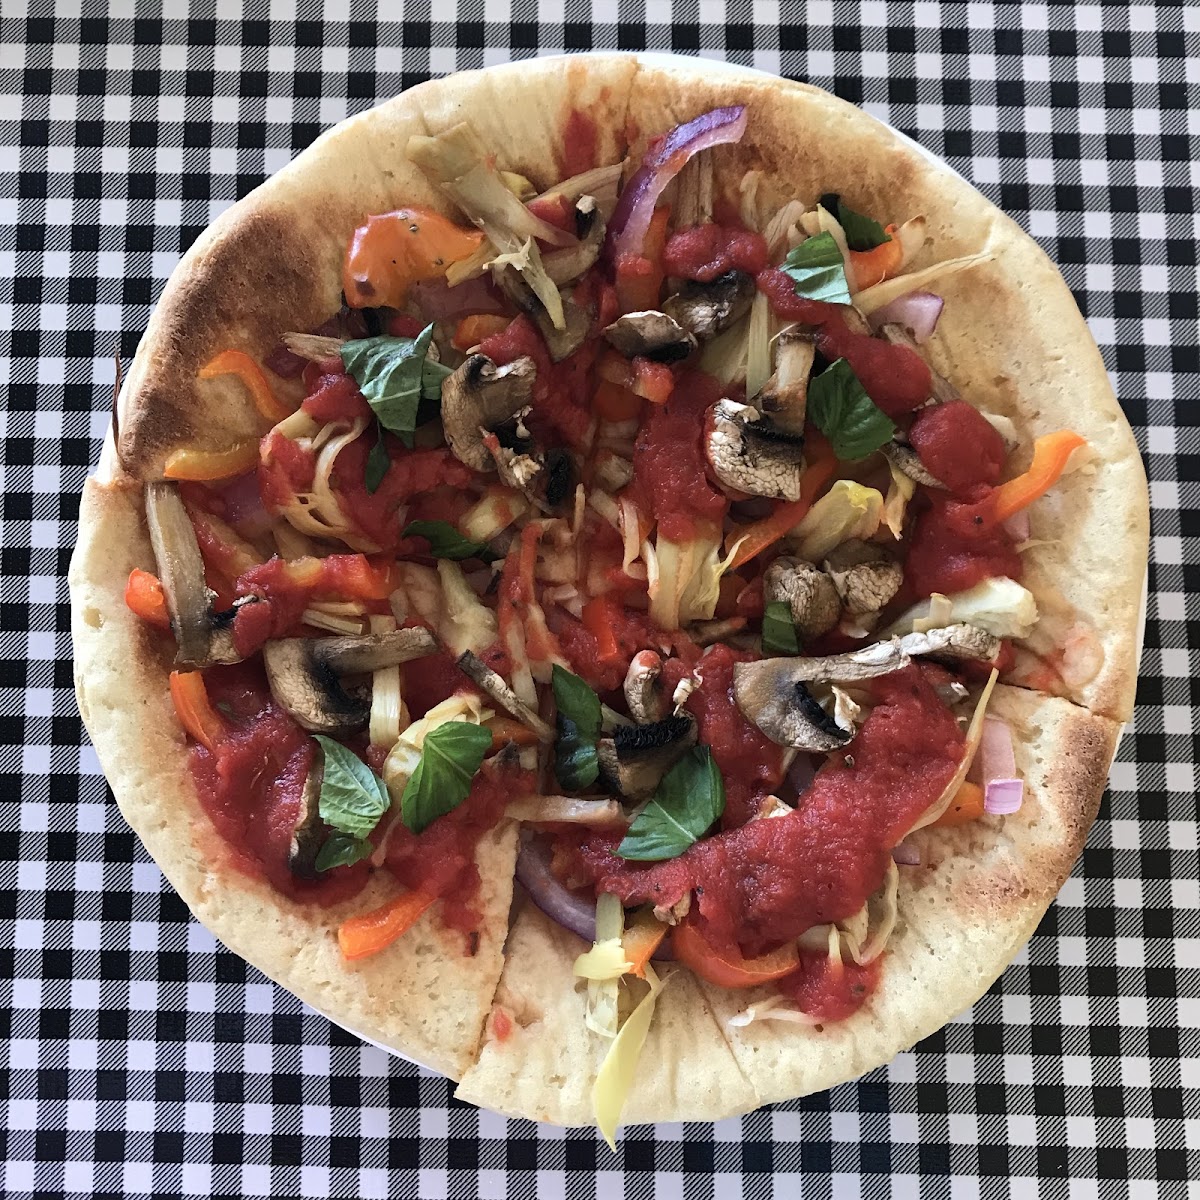 I’m a vegan so mine didn’t have cheese, but my partner had the cheese and said it was tasty. Love when I find a homemade GF pizza crust in random small towns.